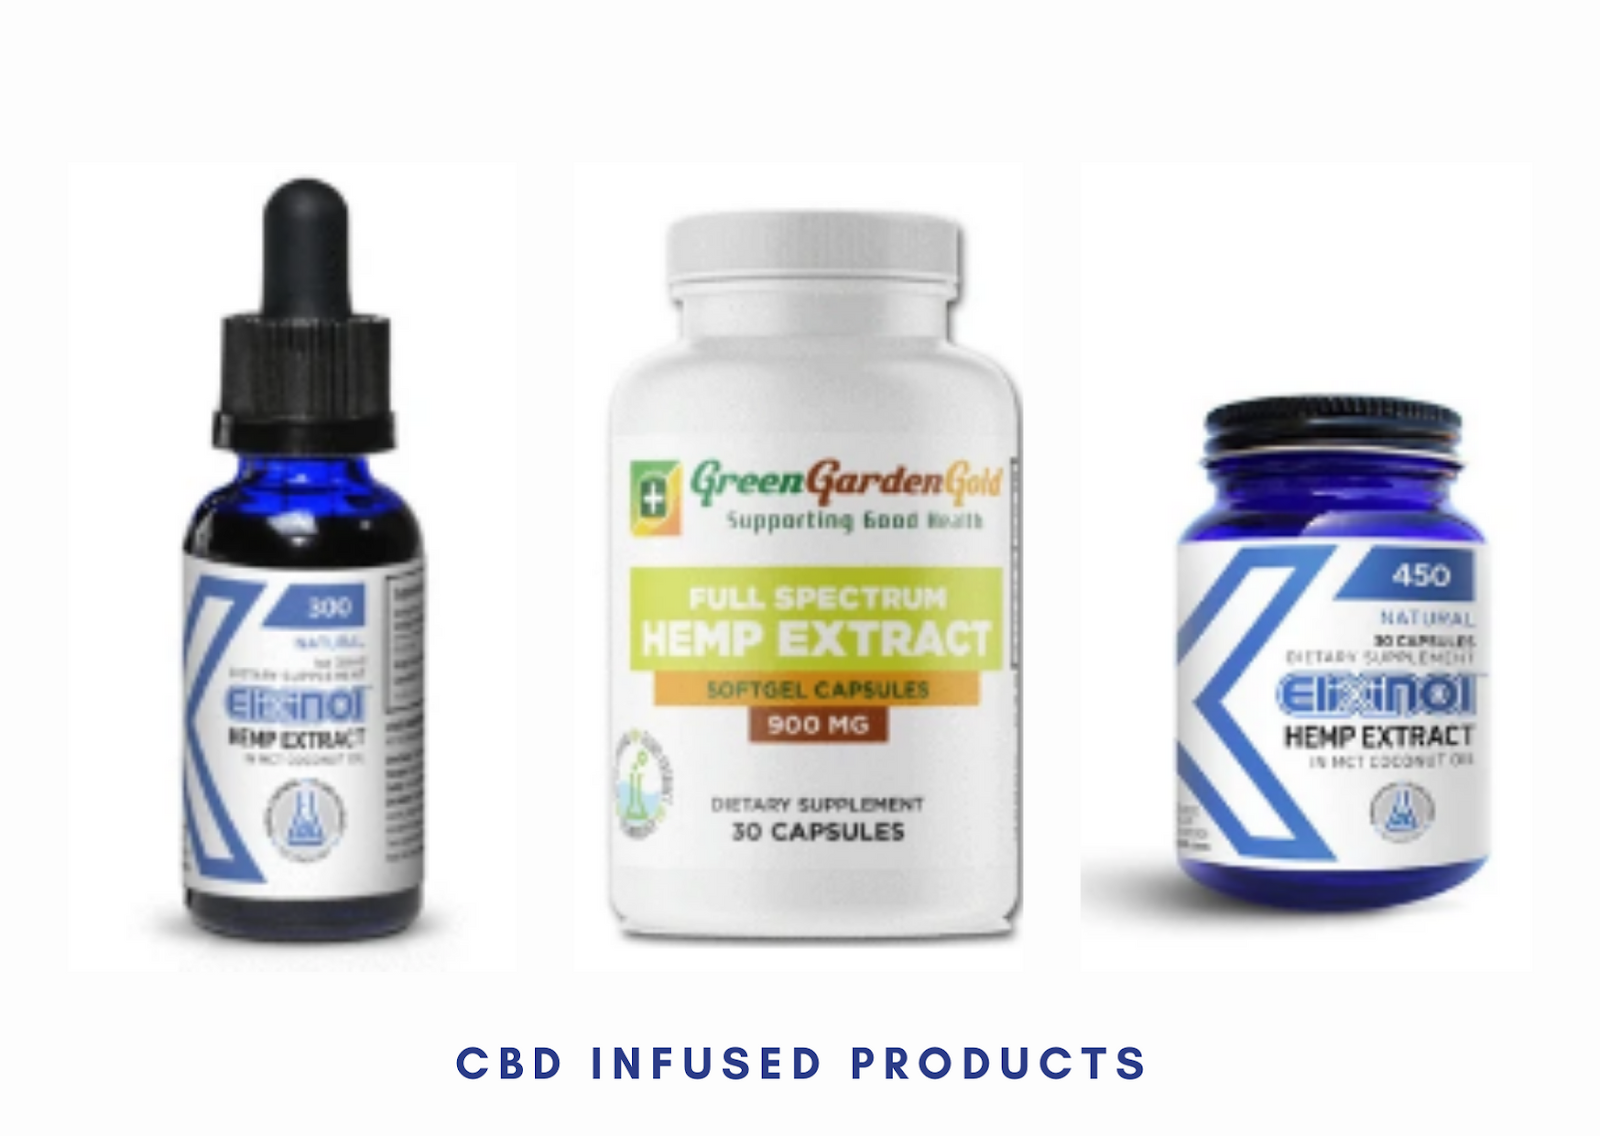 CBD Infused Products, Full Spectrum Hemp Extract And Much More